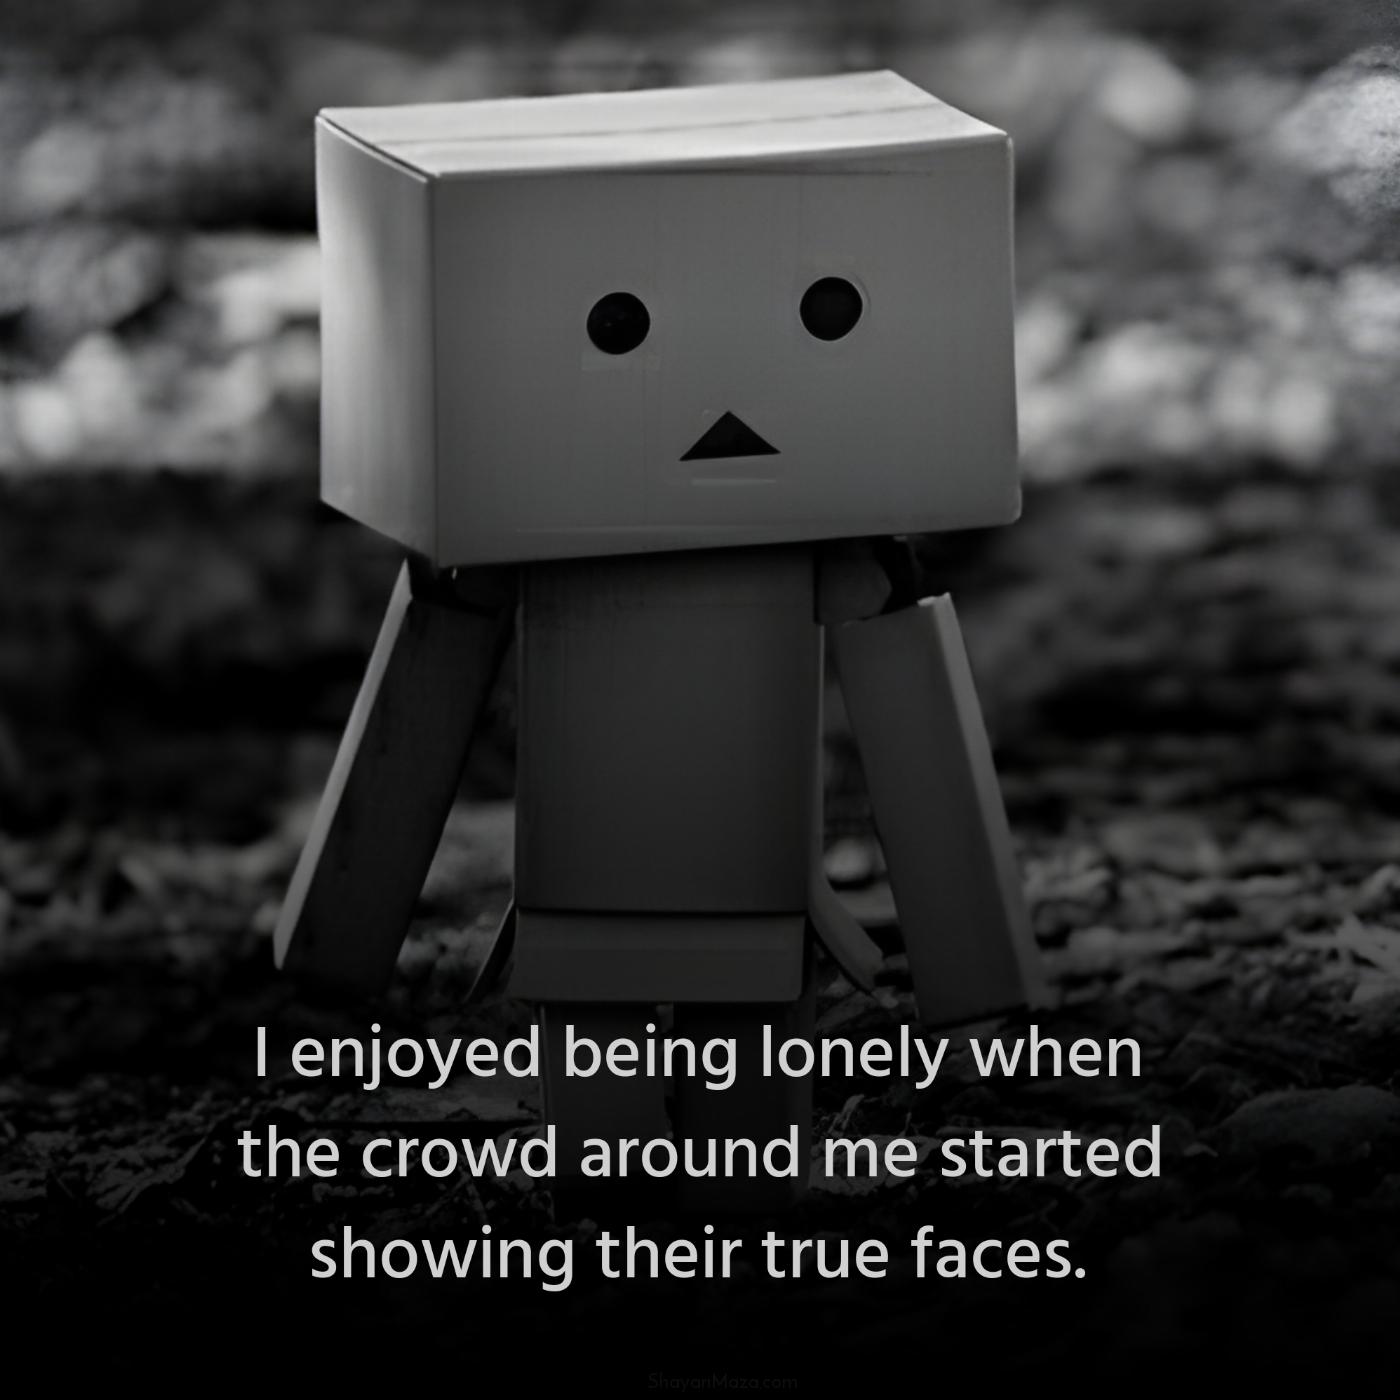 I enjoyed being lonely when the crowd around me started